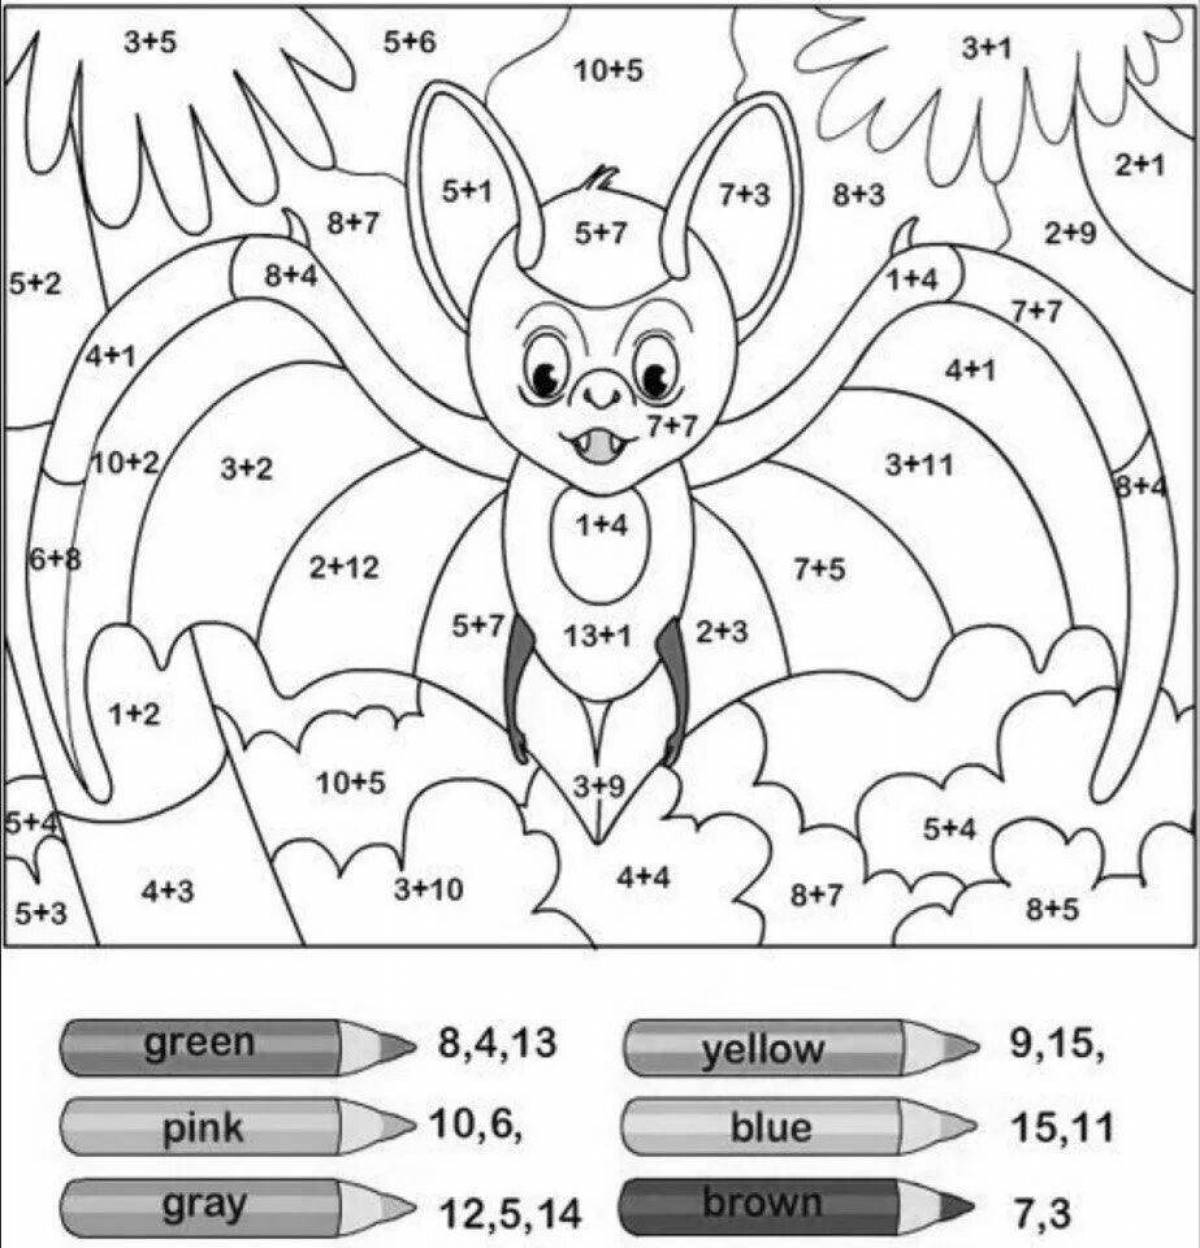 Coloring by numbers for grade 2 with color definition